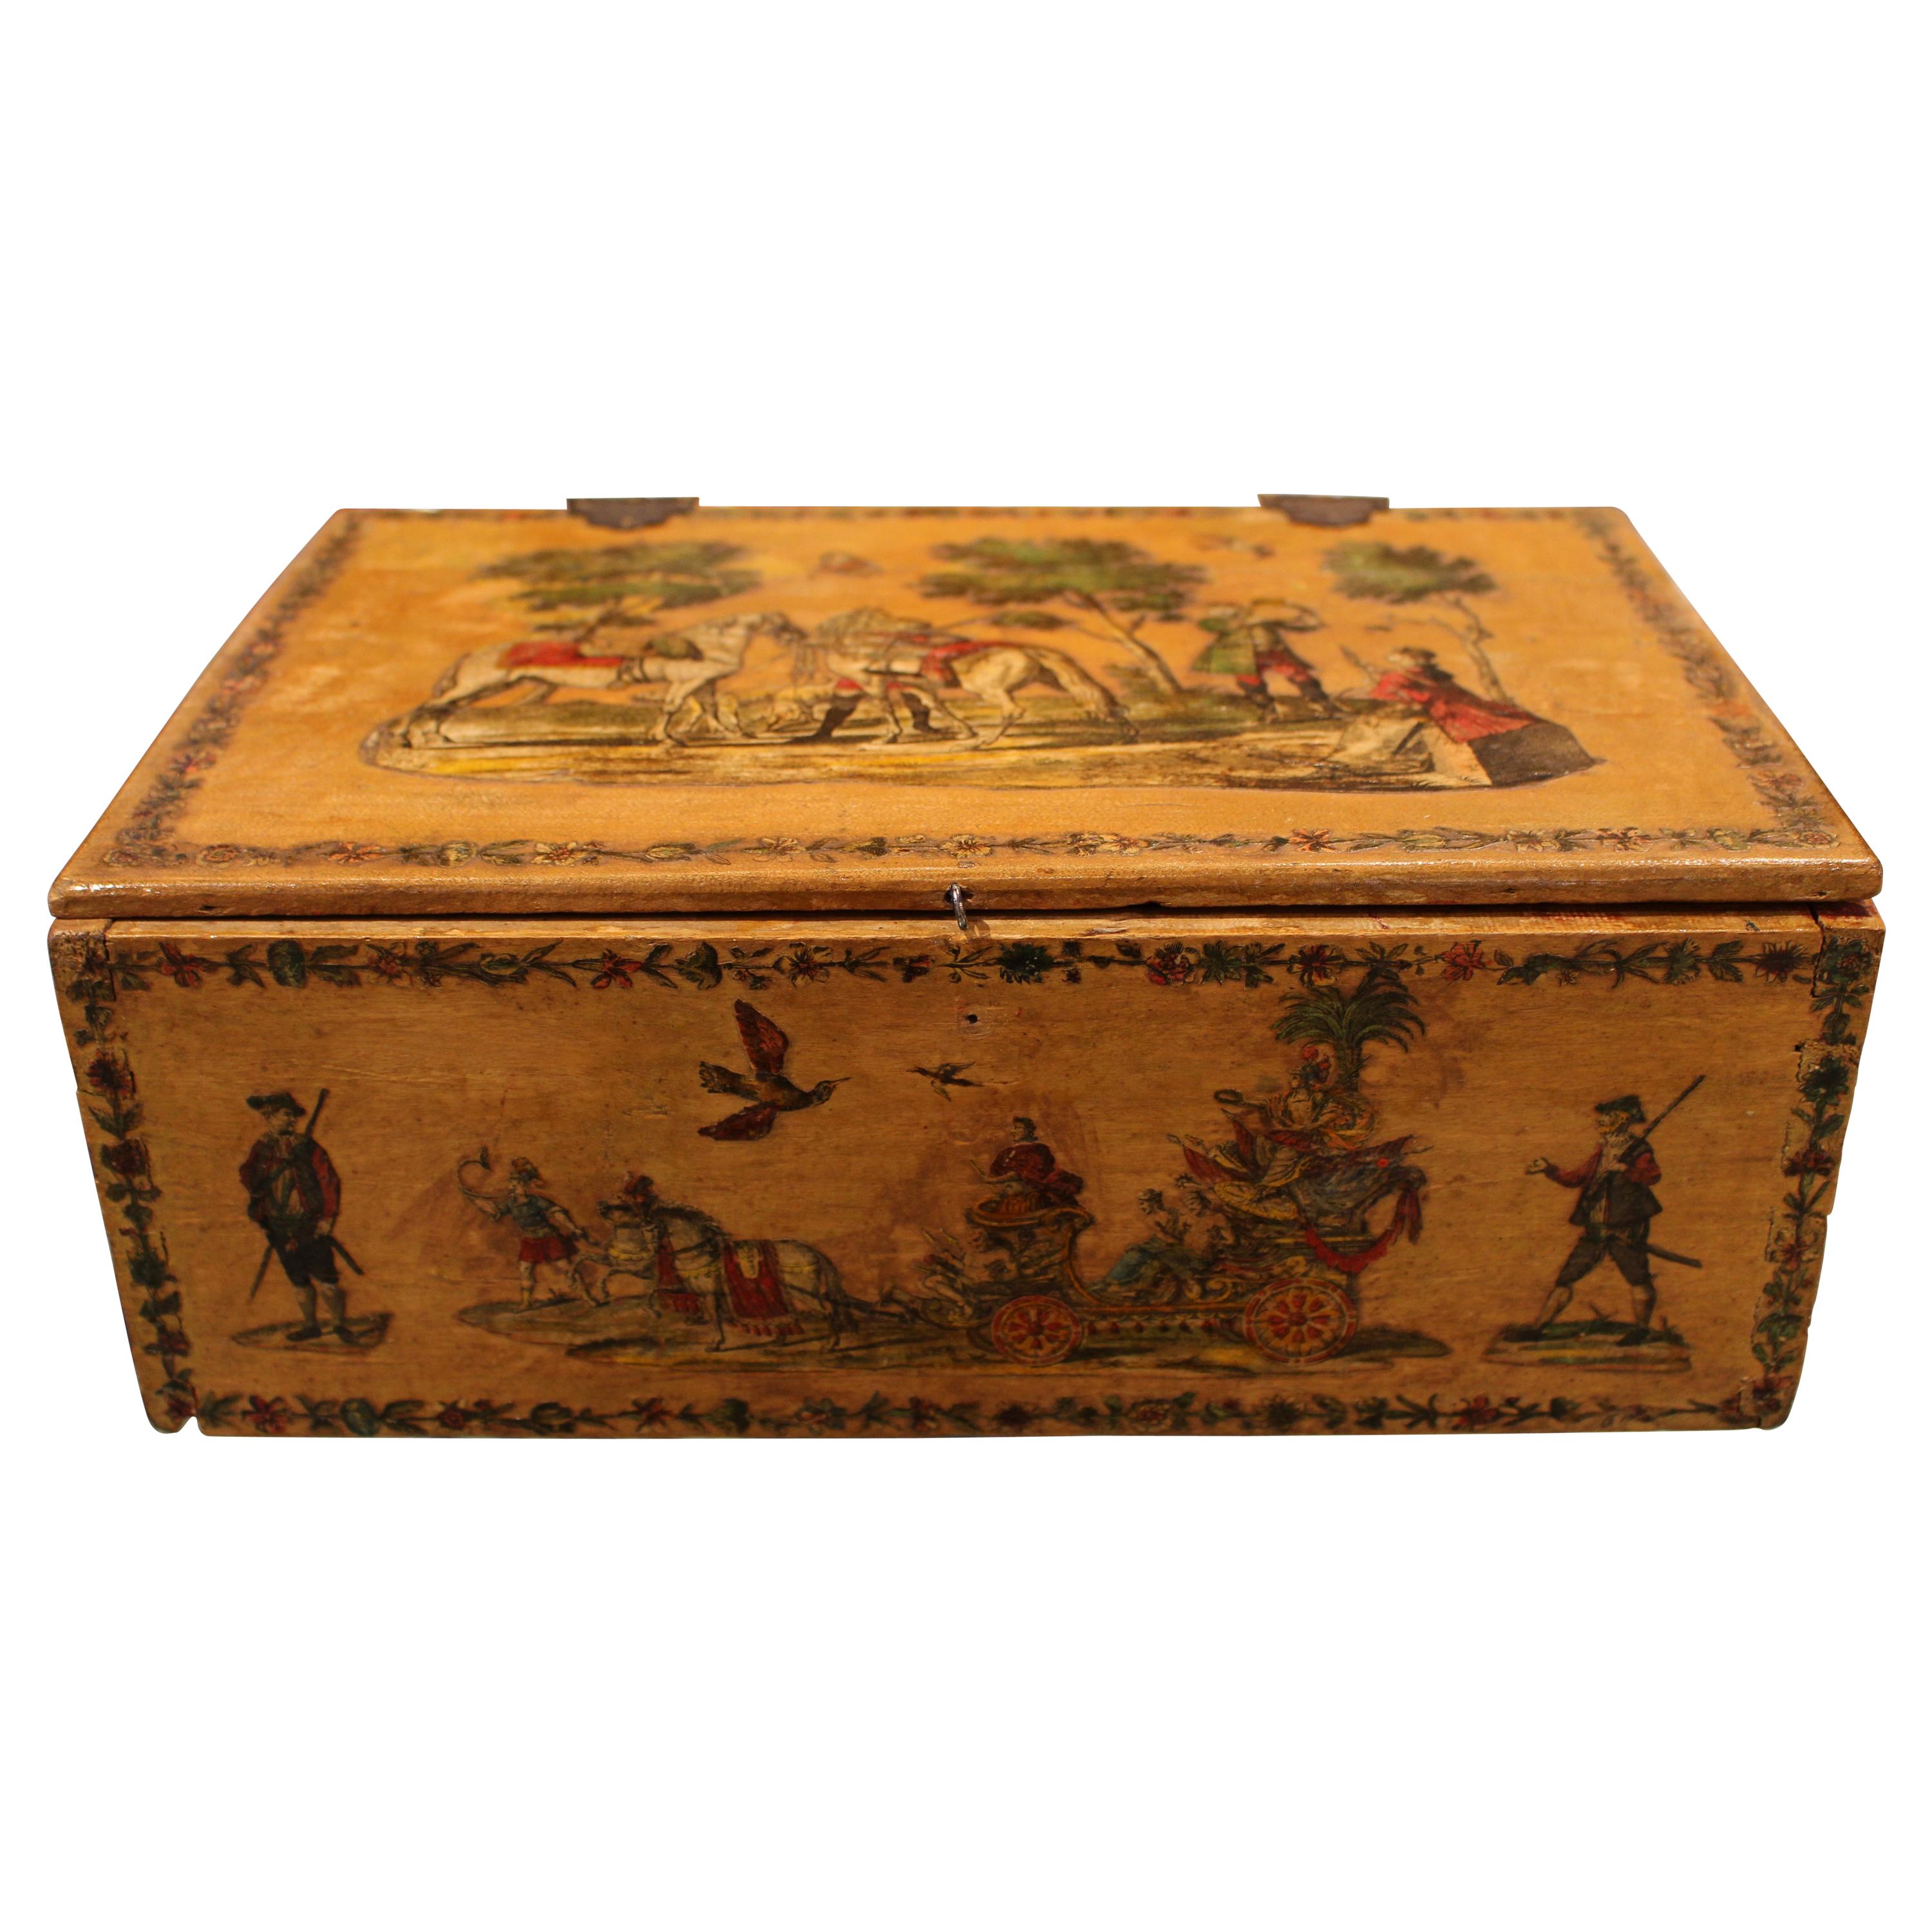 Beautifully Colored Decoupage Box with 17th Century Design Motif